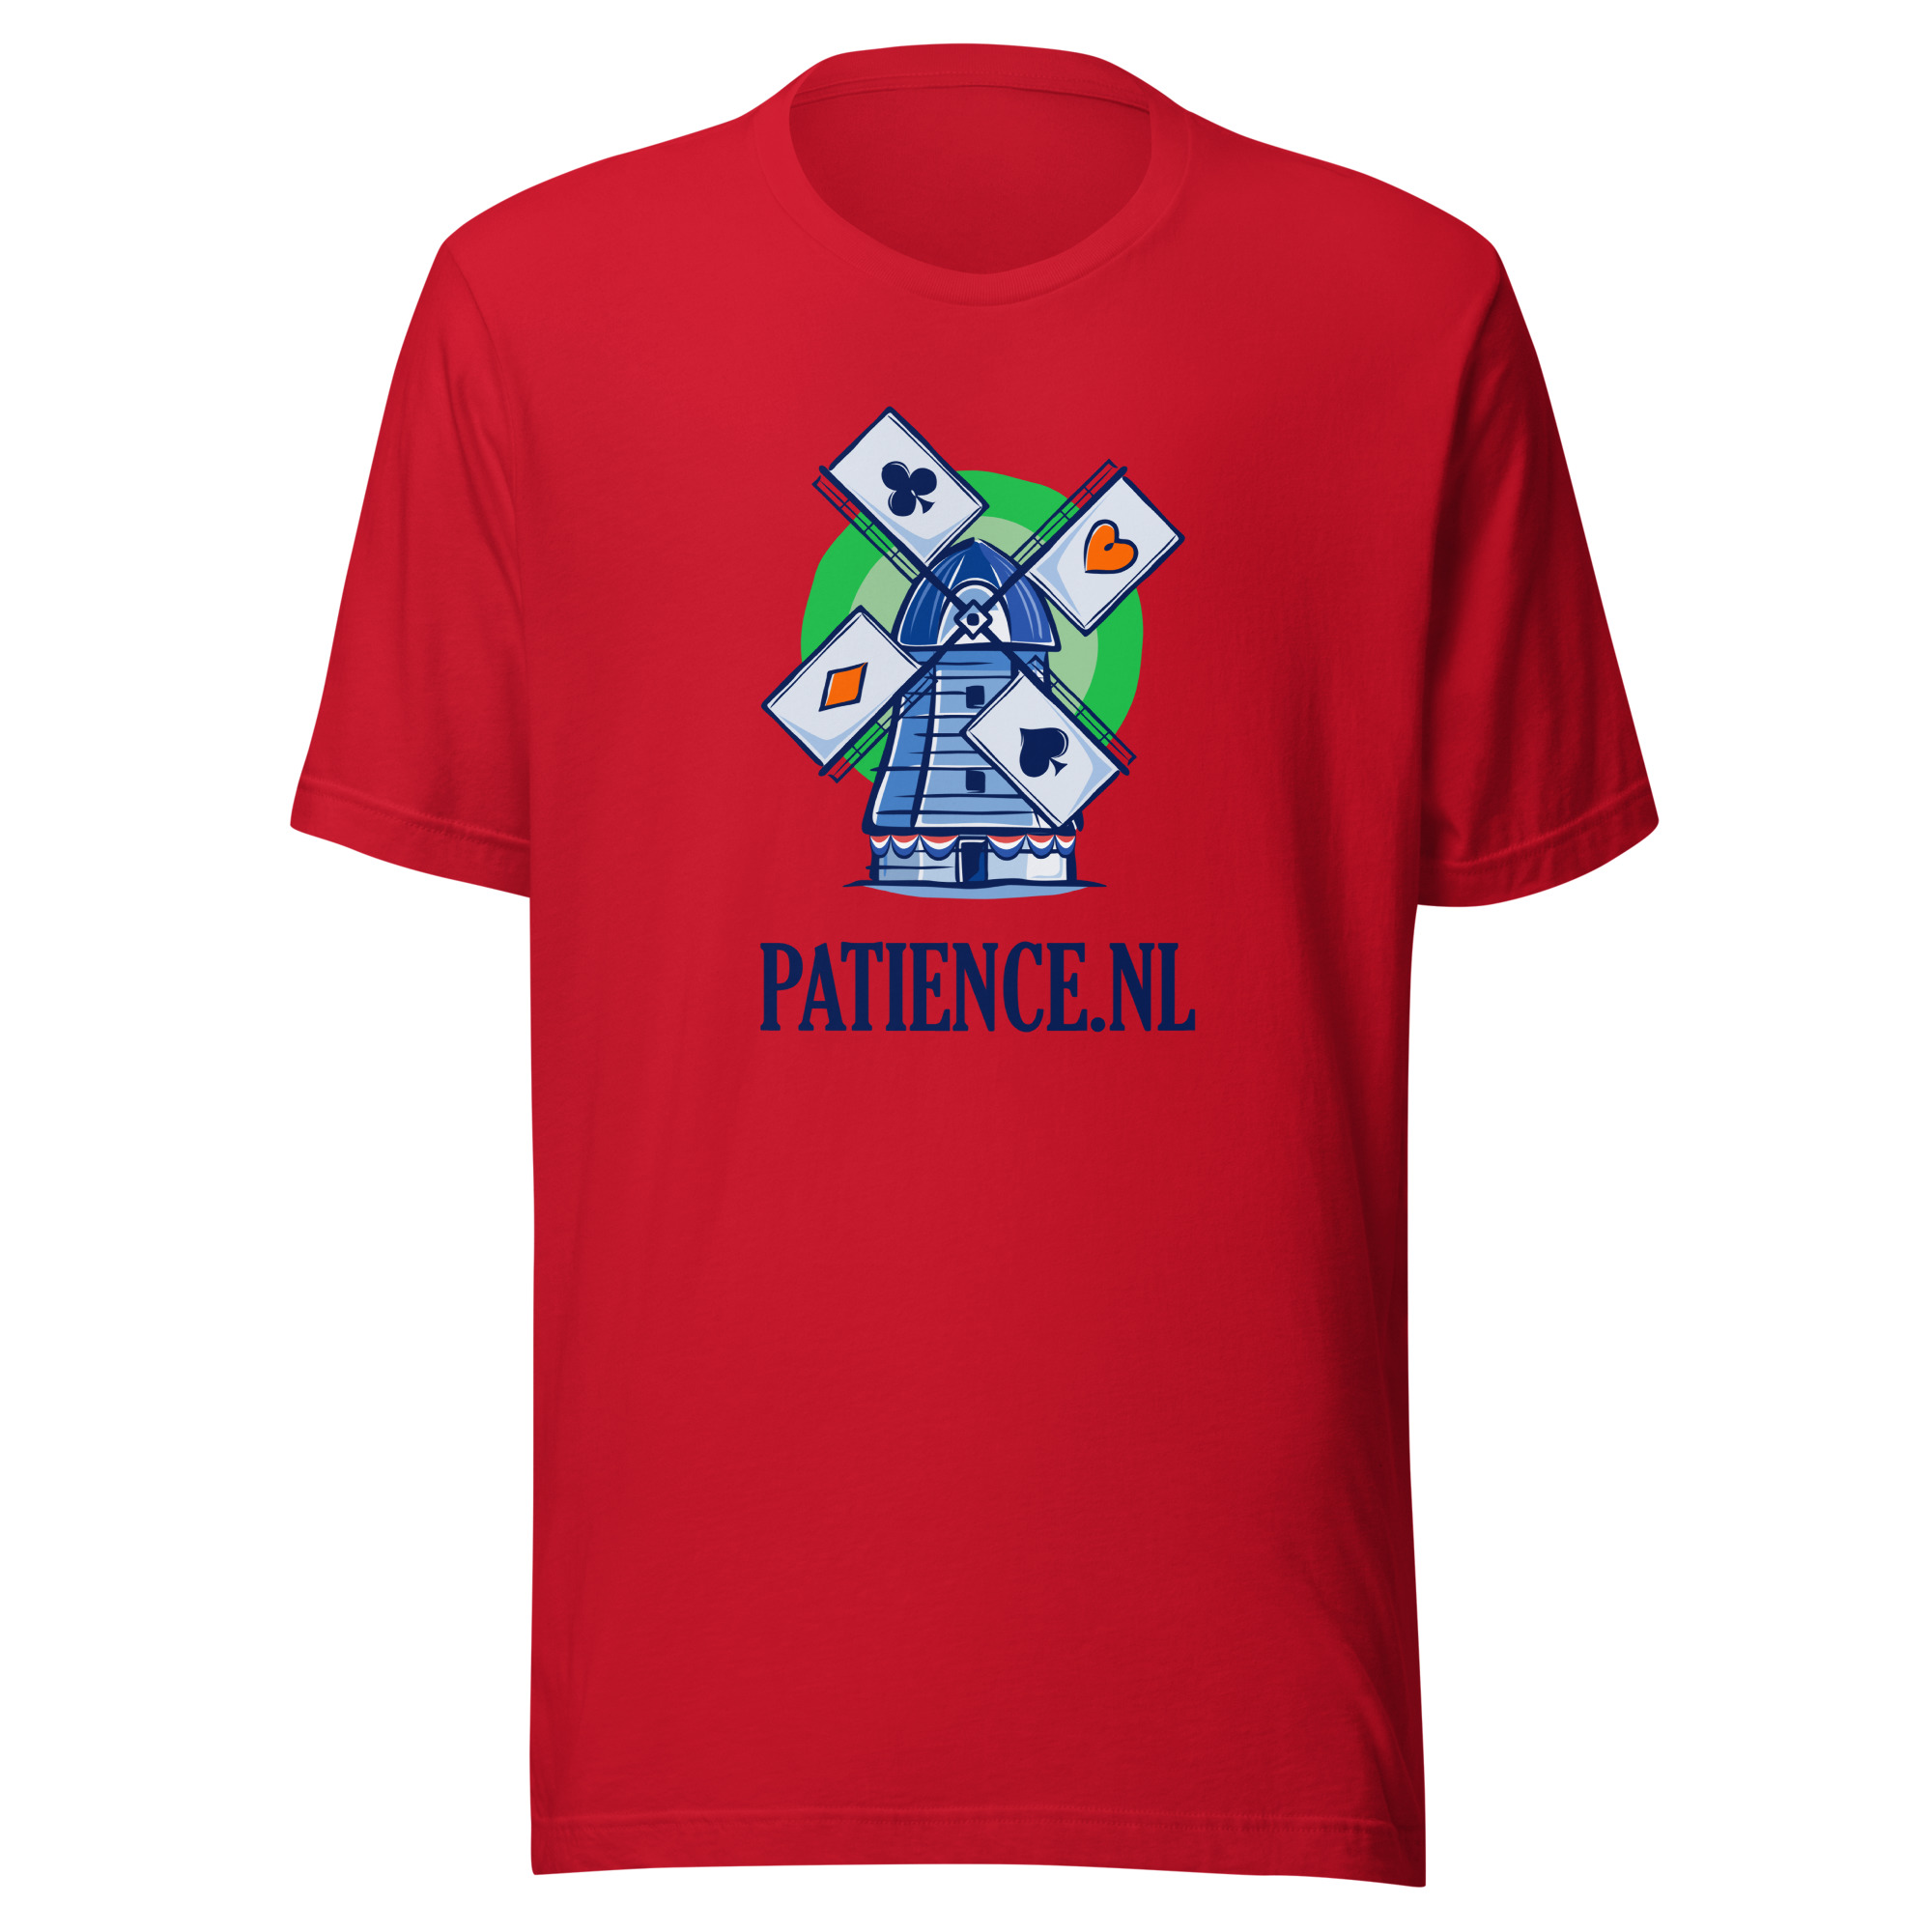 T-shirt Patience.nl Donker Rood